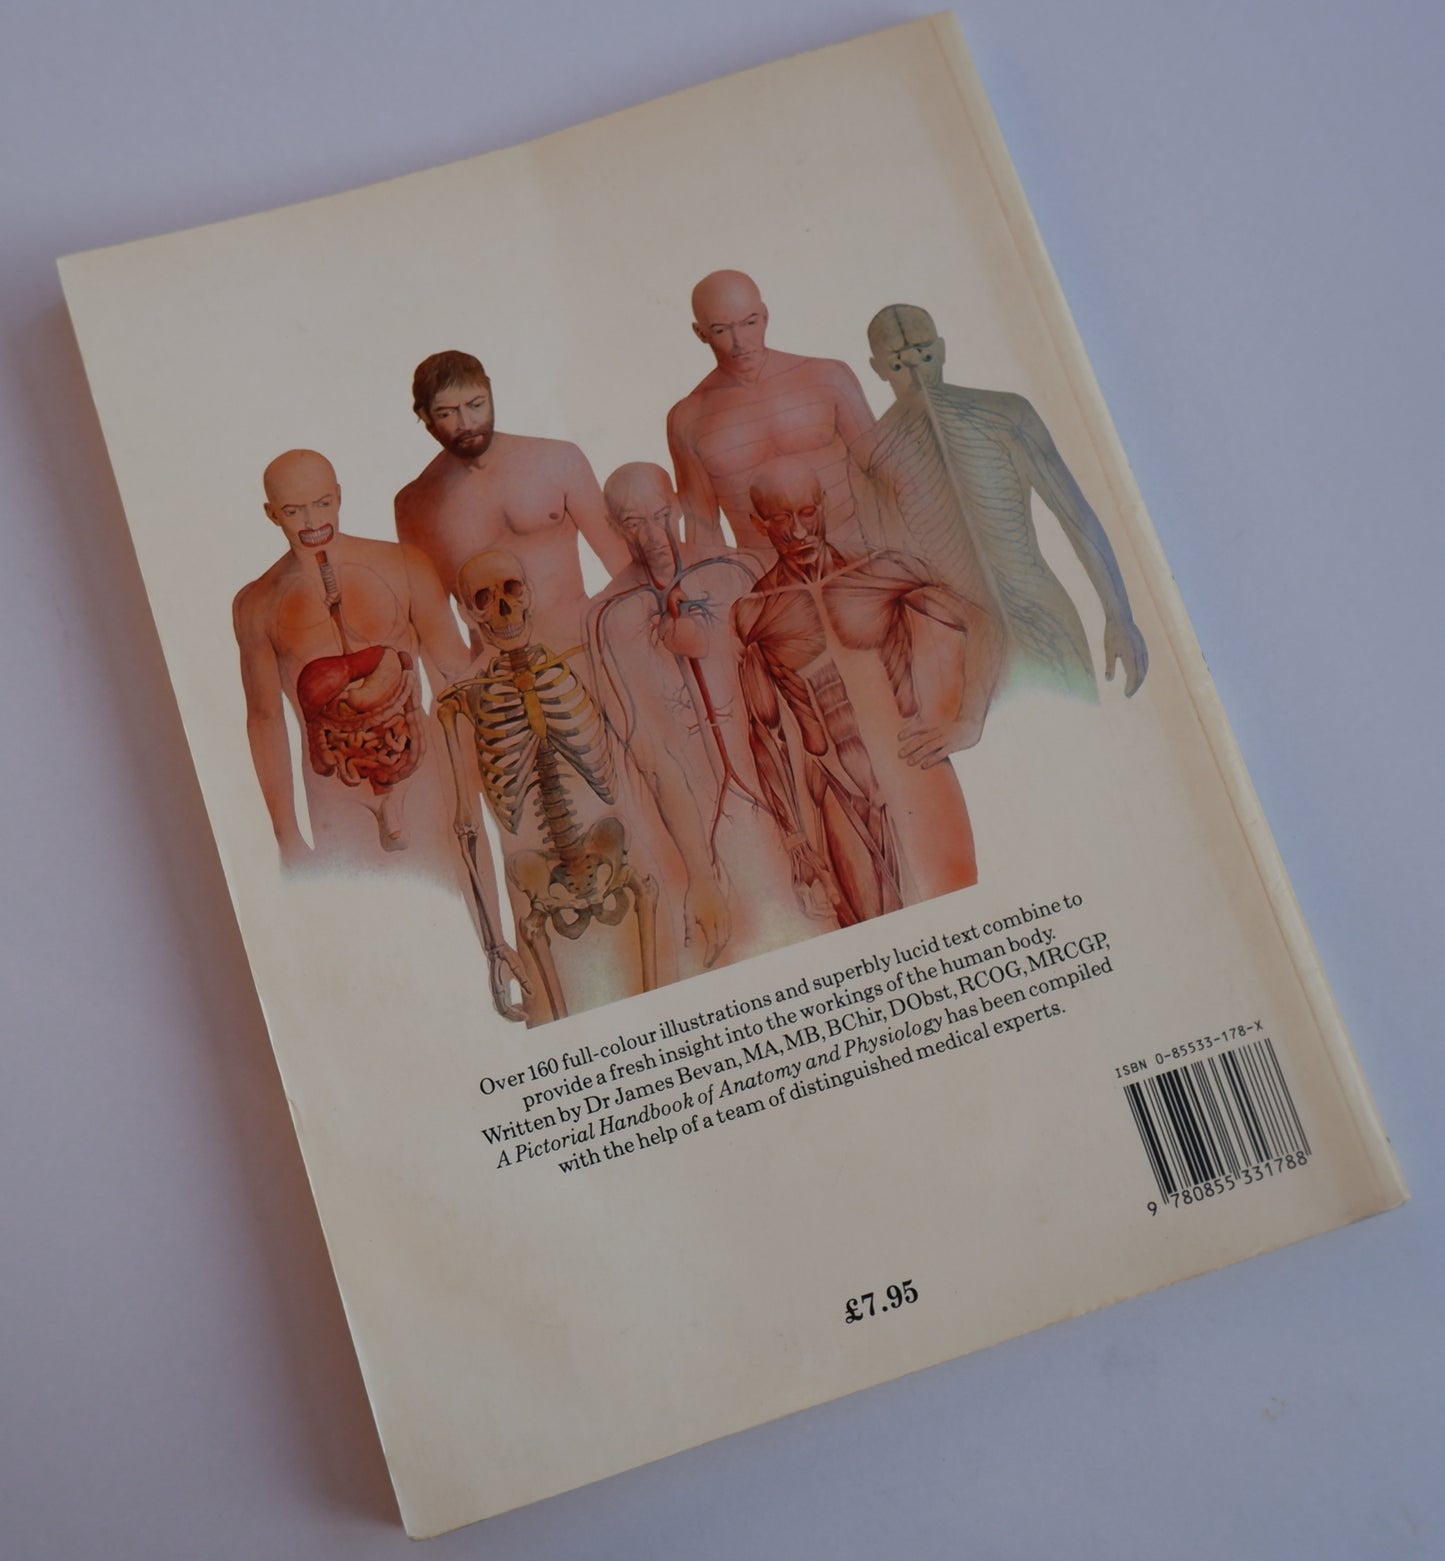 A Pictorial Handbook of Anatomy and Physiology  (1989 edition)- James Bevan